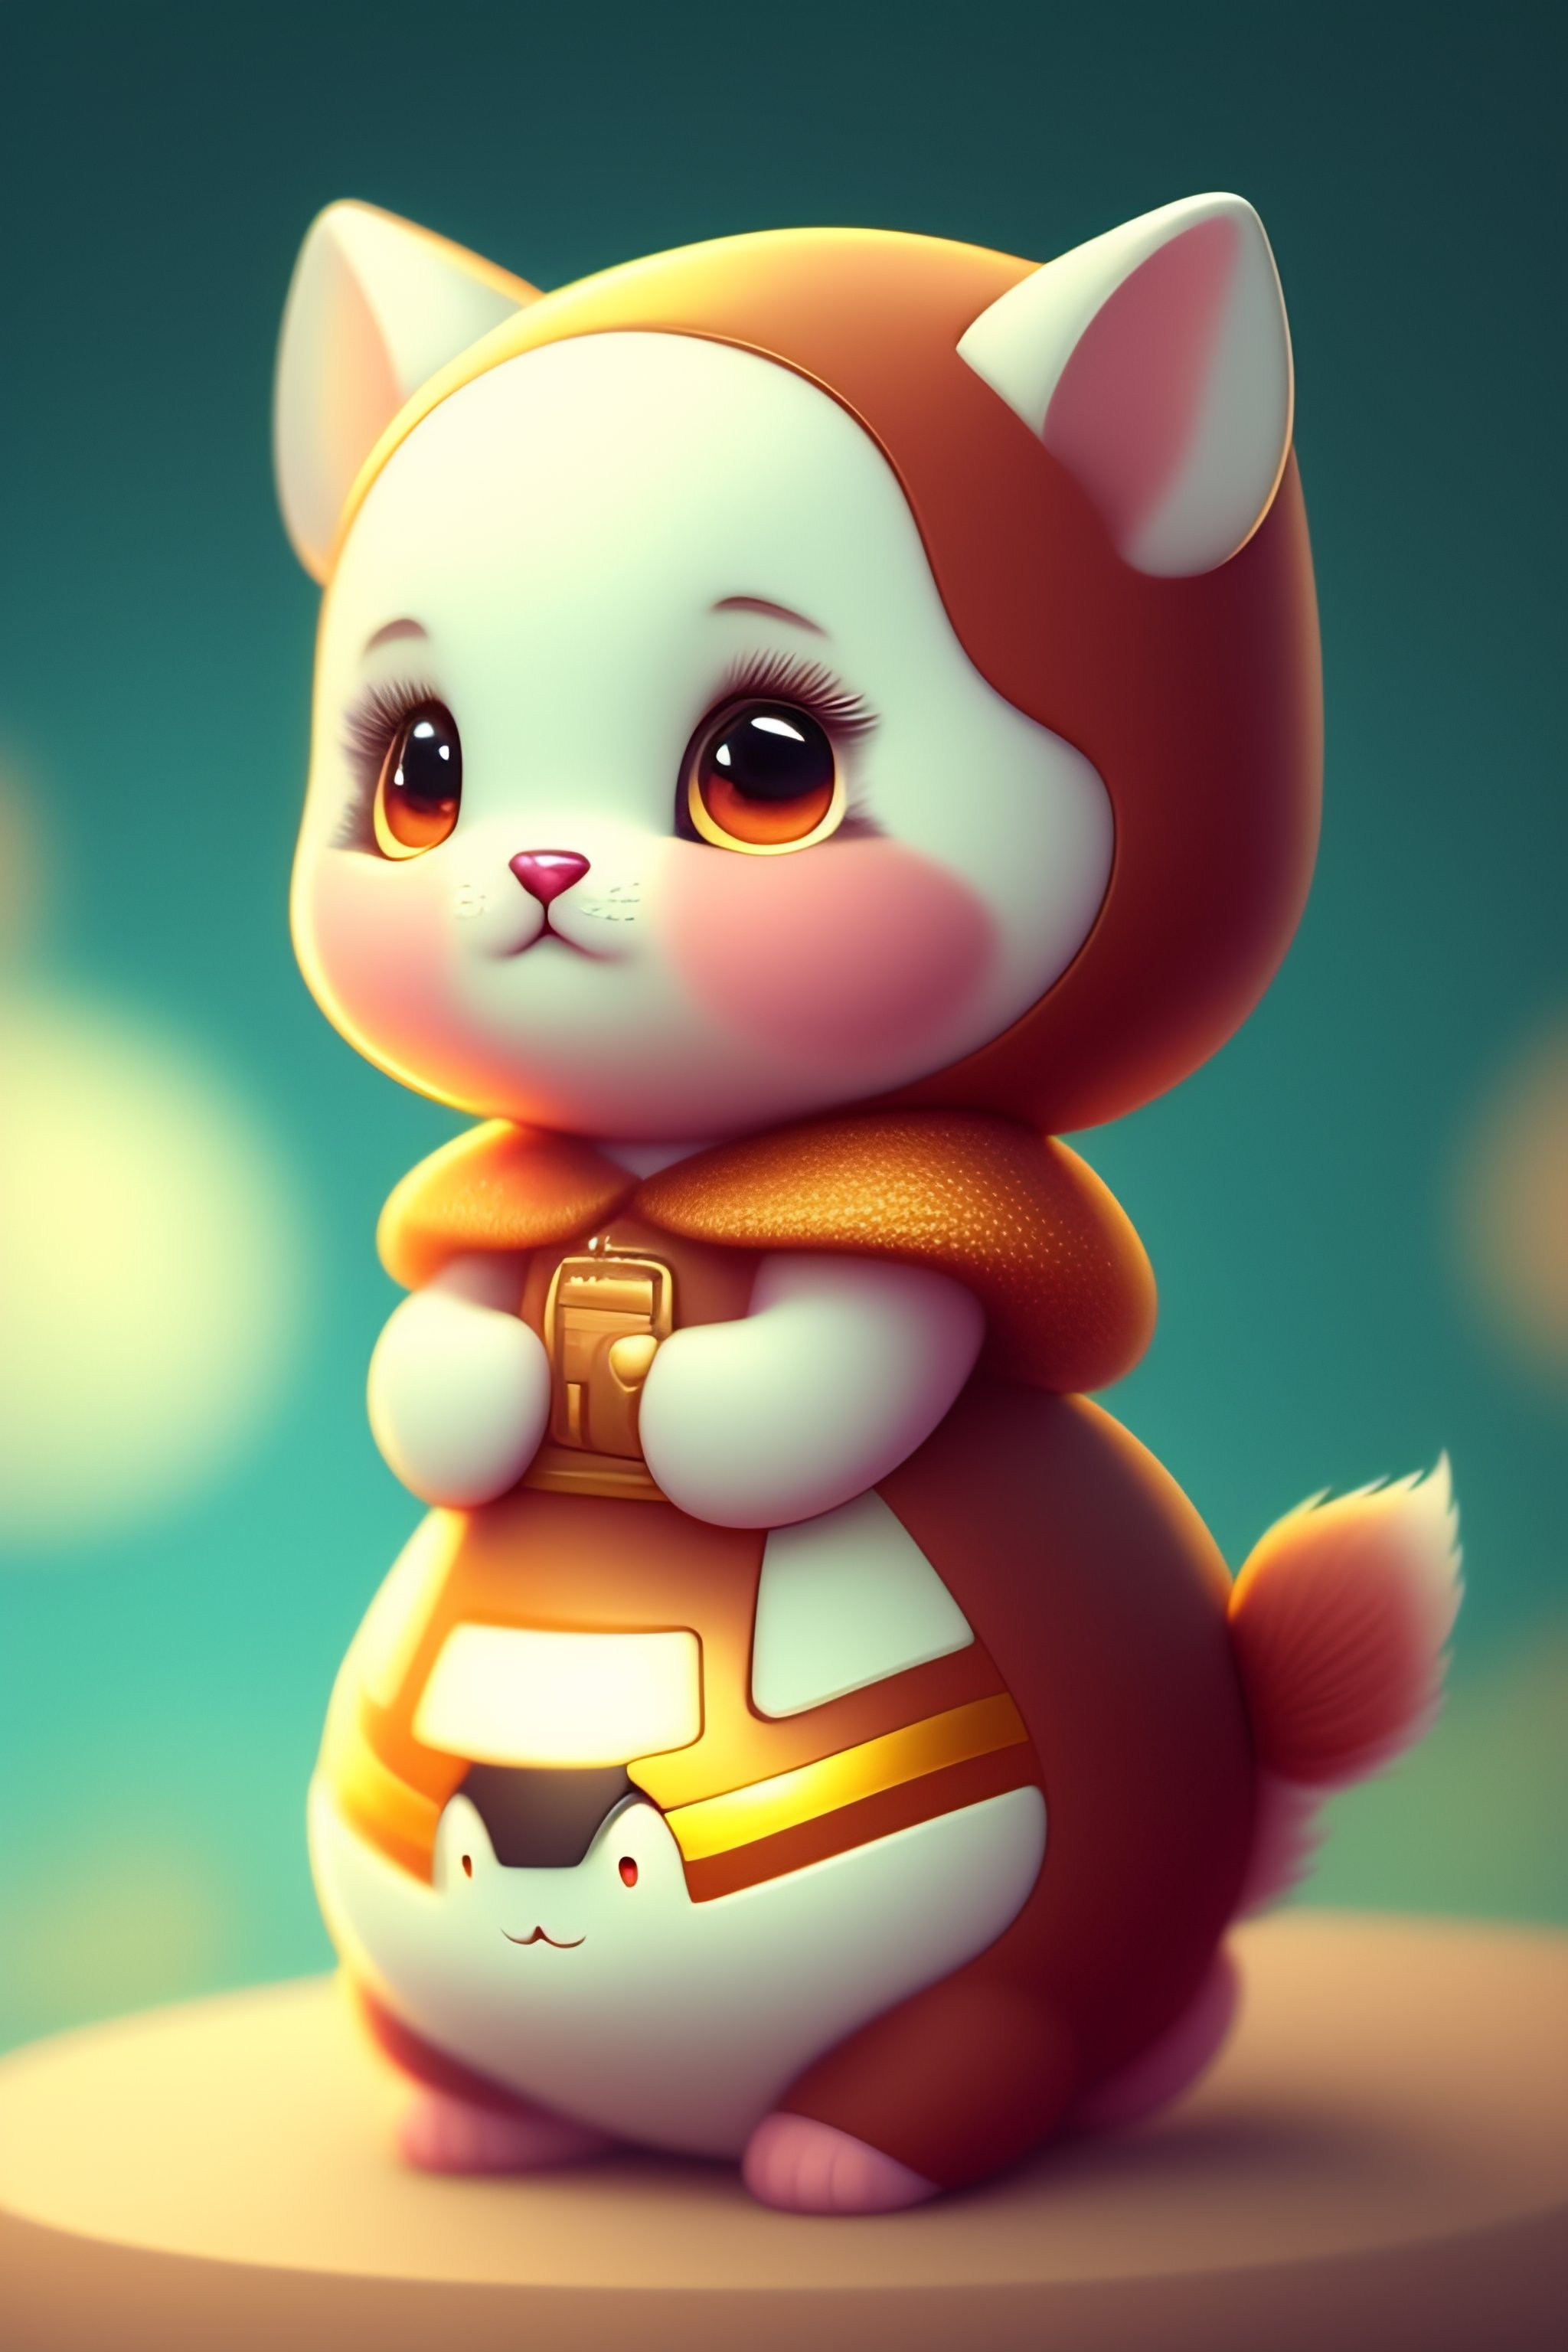 Lexica - Cute and adorable fluffy baby cat, fantasy, dreamlike, super cute,  trending on artstation